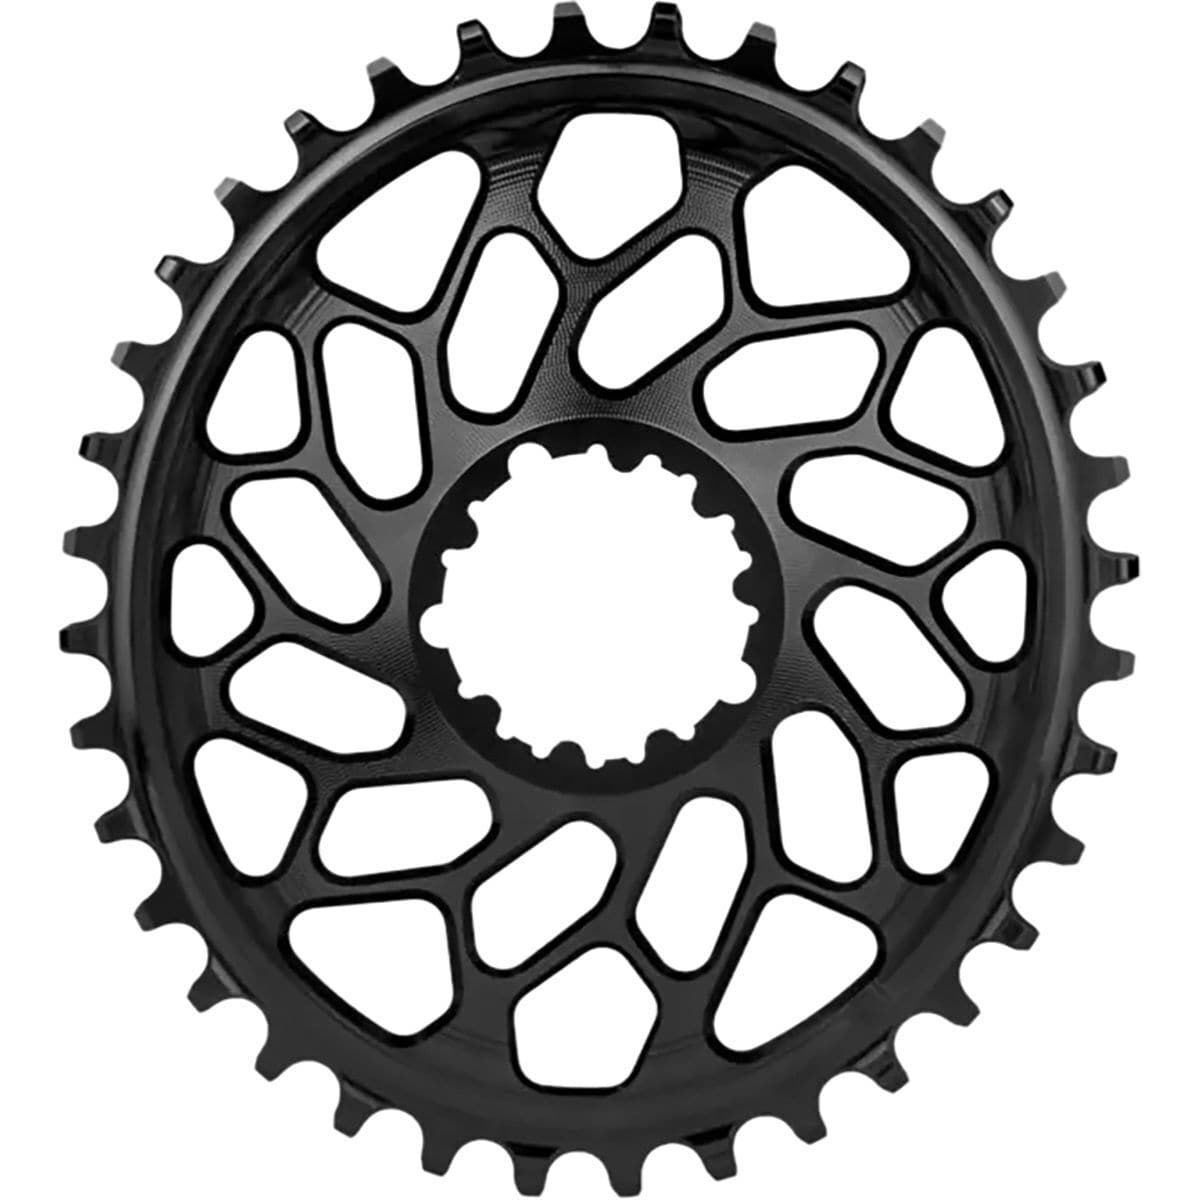 Absolute Black SRAM CX Oval Direct Mount Chainring